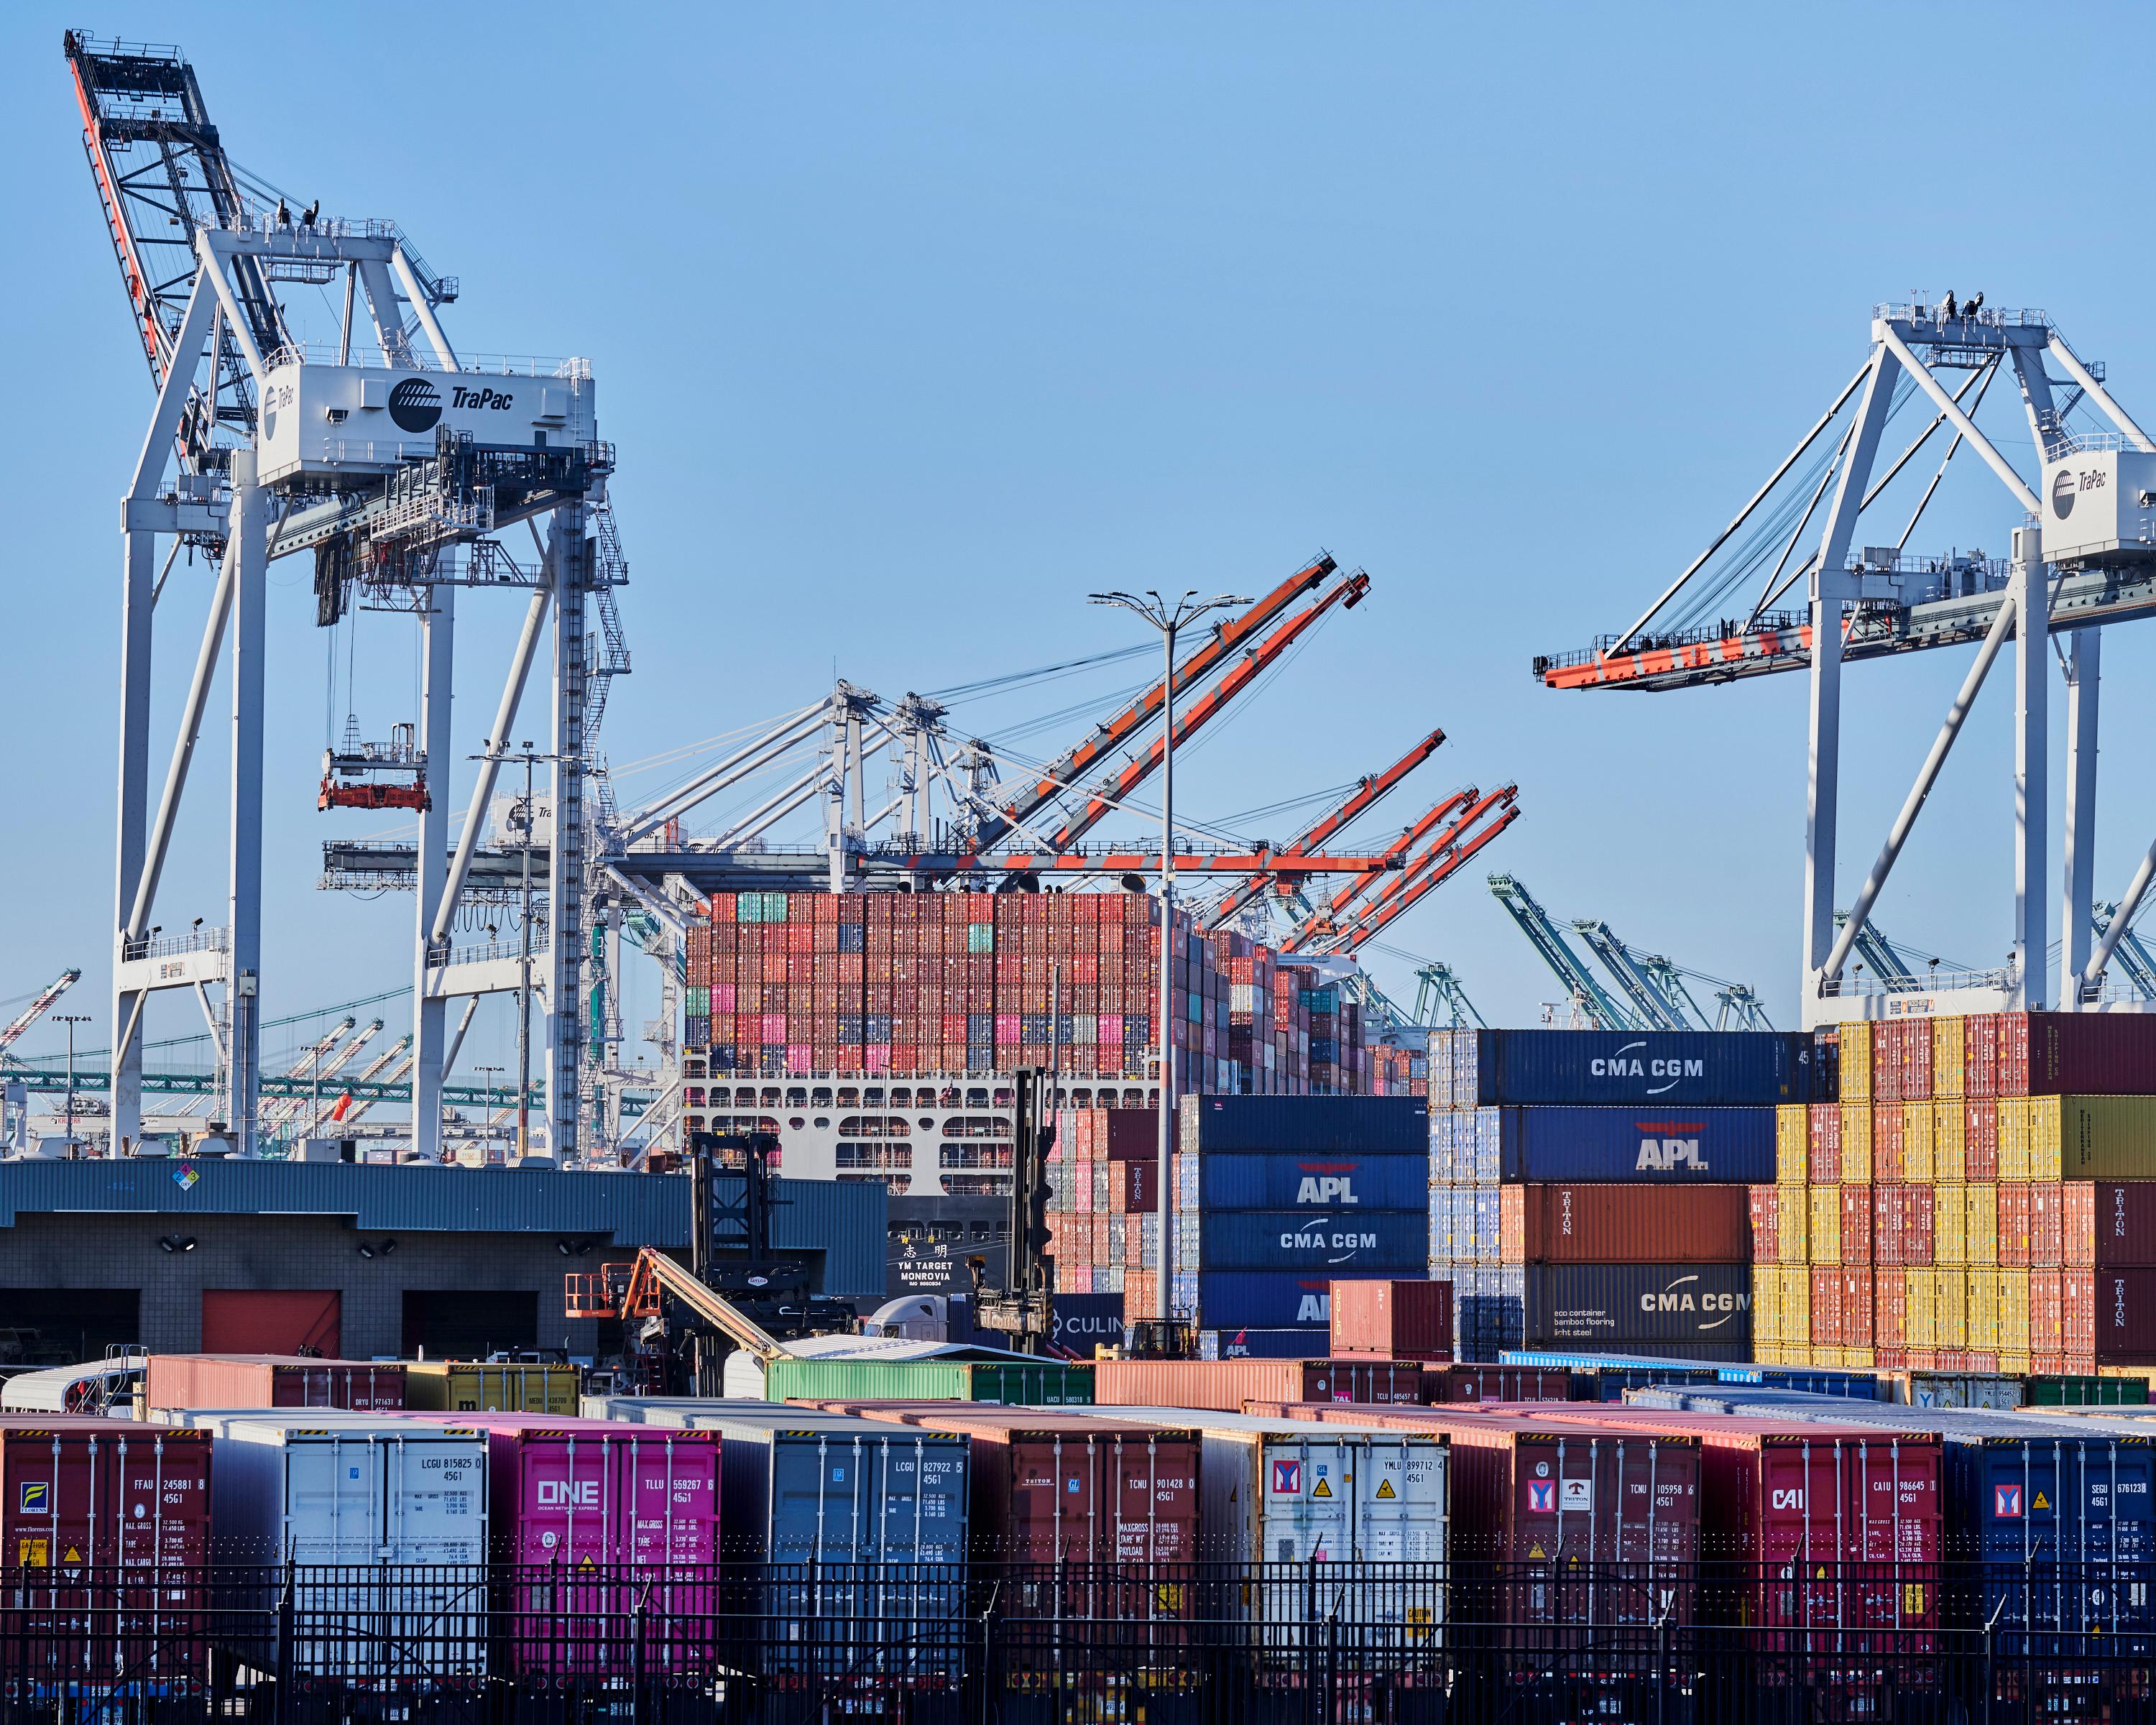 Ocean Freight Shipping Costs Are Driving Goods Prices Higher